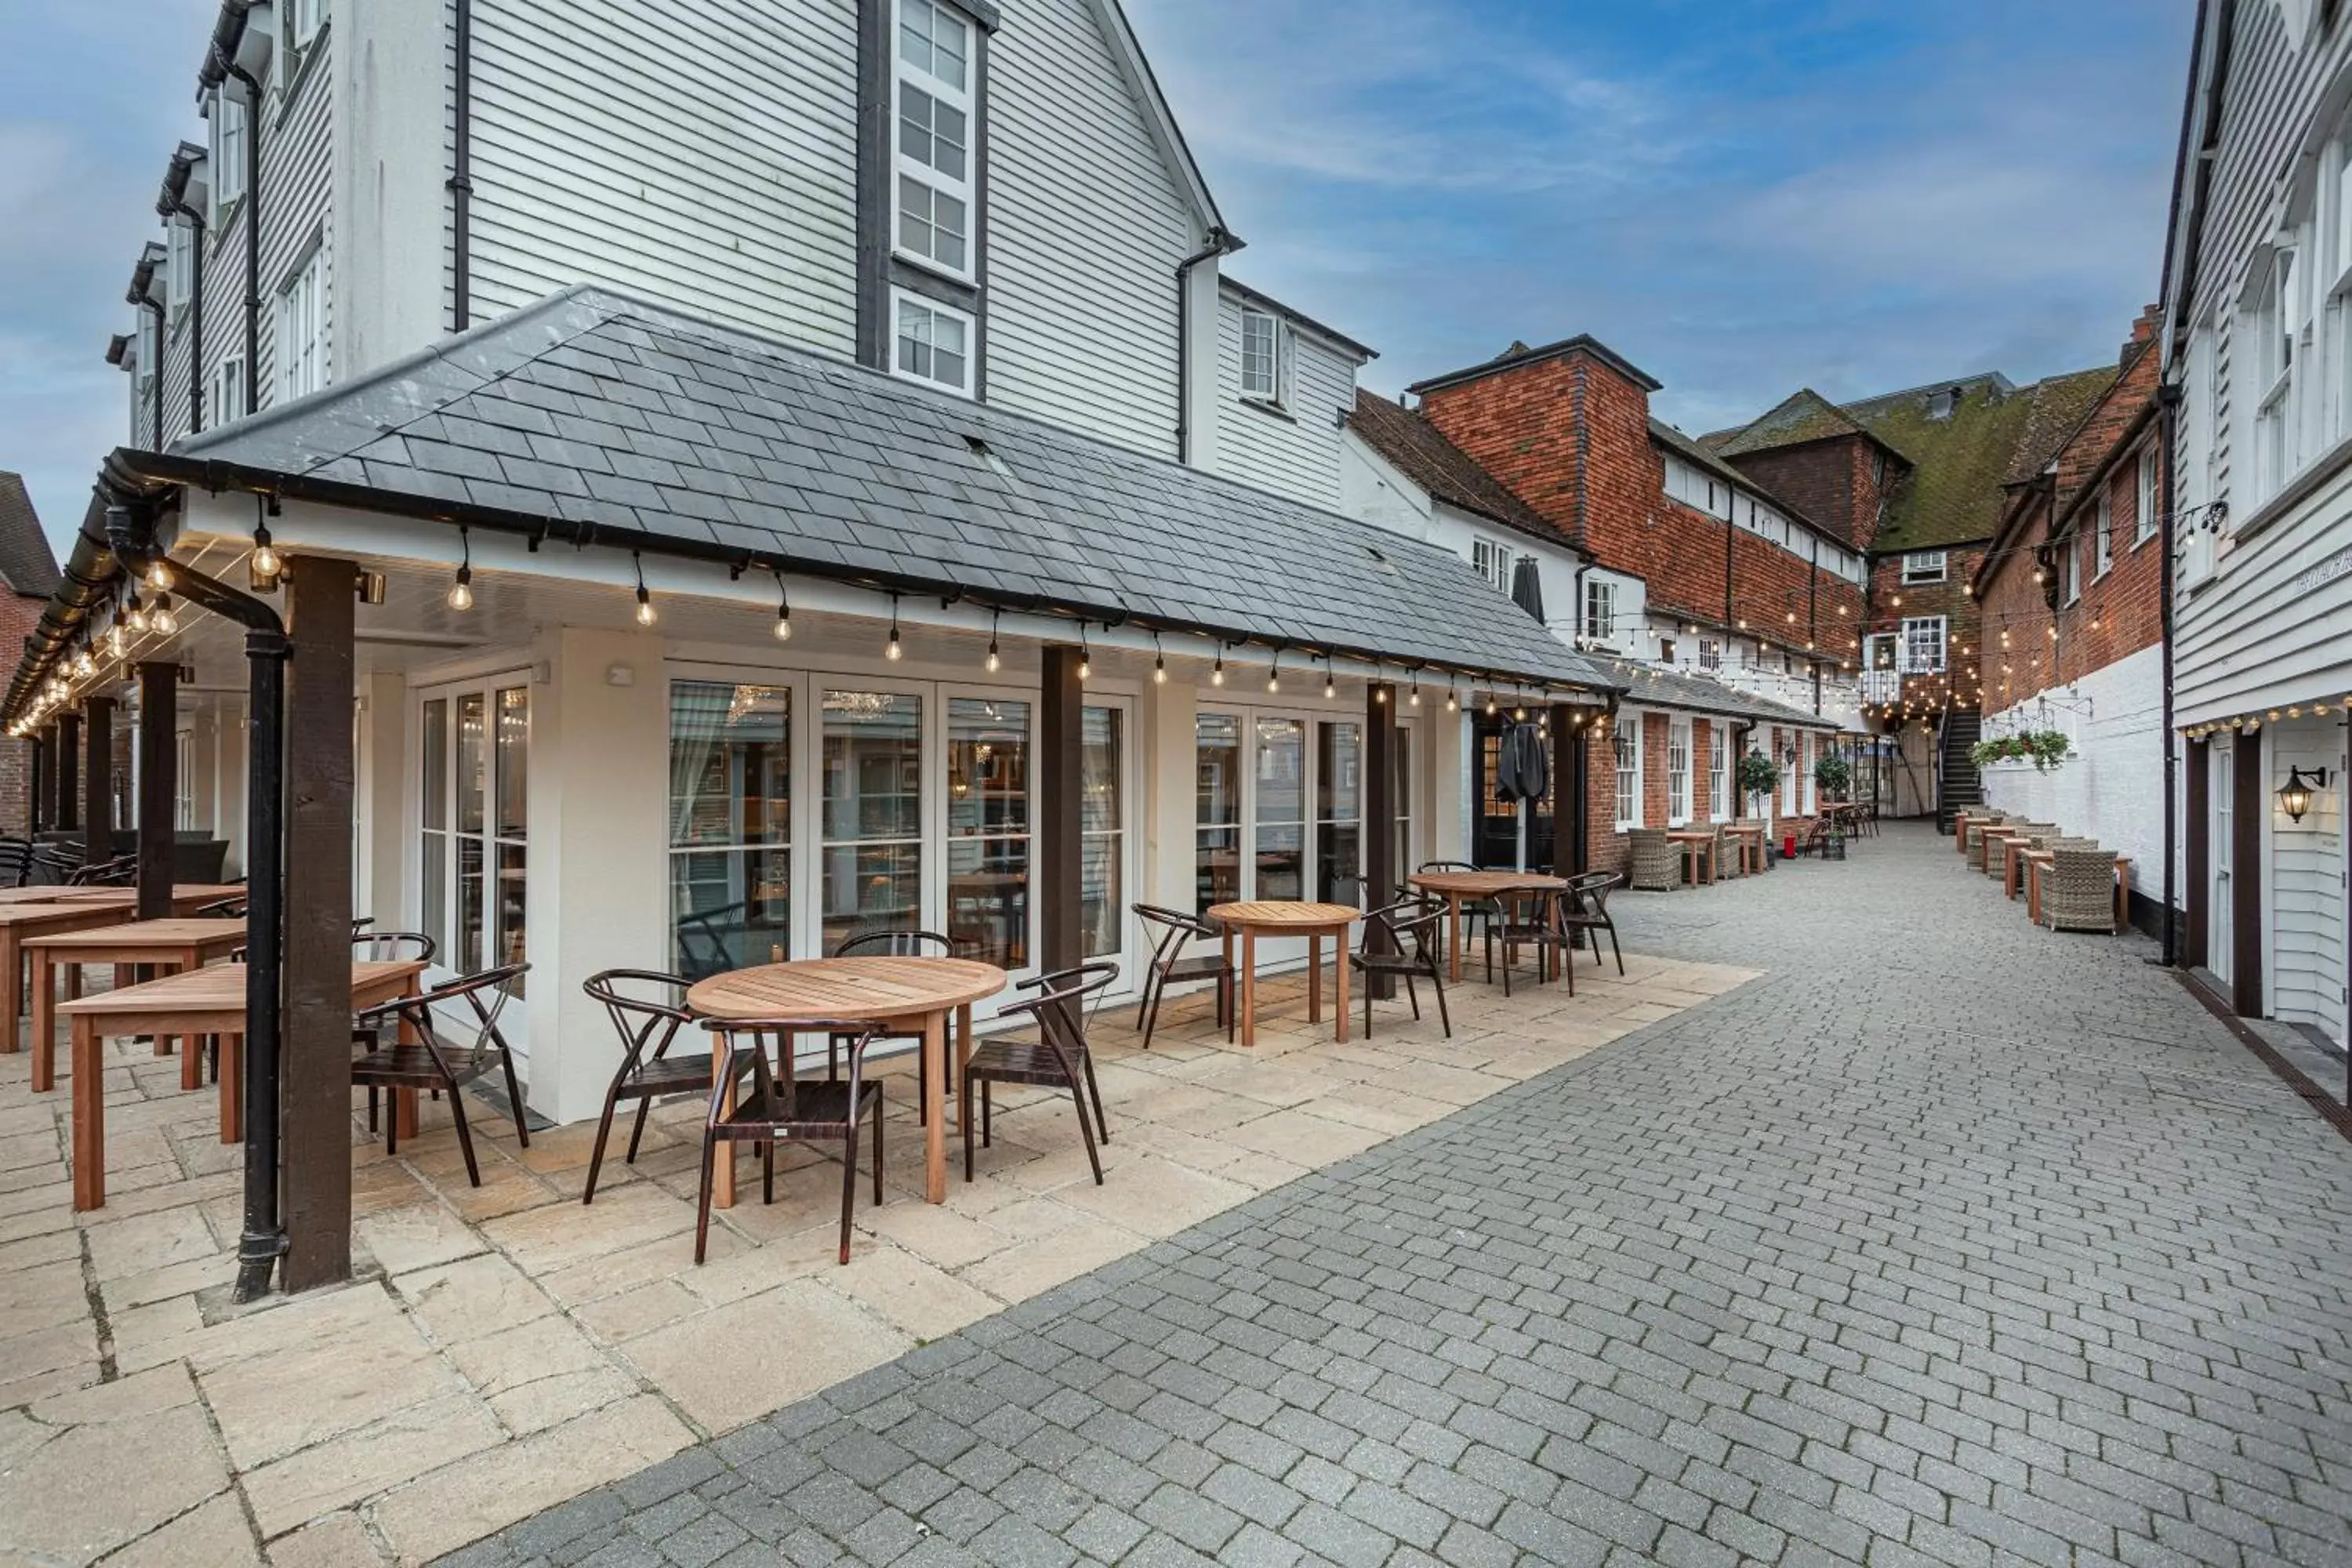 Property building in The White Horse Hotel, Romsey, Hampshire